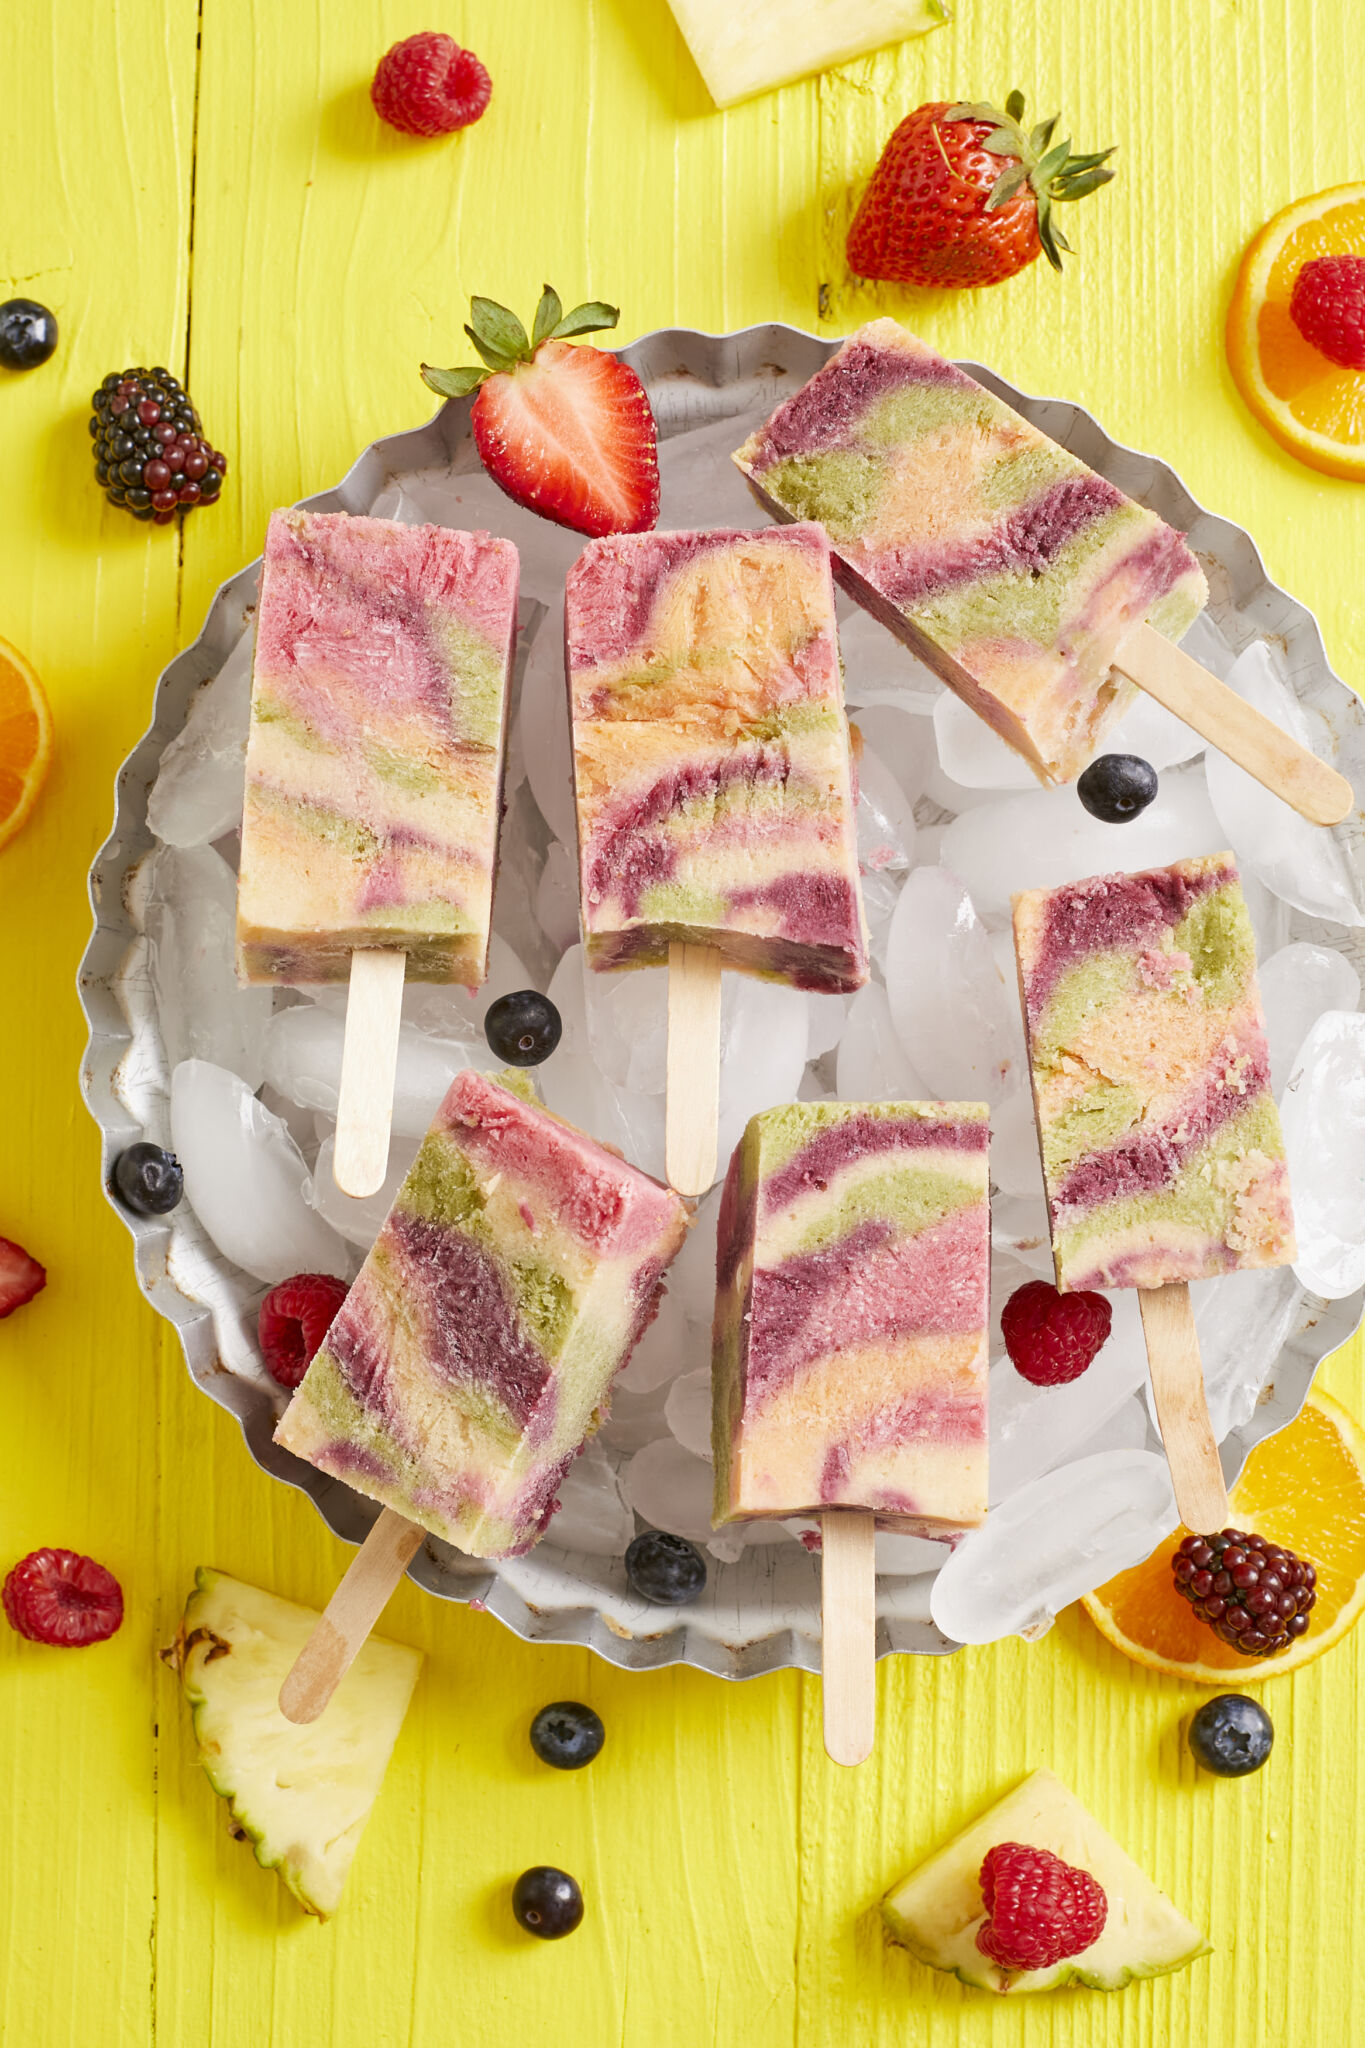 Colorful all natural tie dye popsicles are in orange, red, purple, and green colors, served on ice in an aluminum pie pan, with fresh blackberries, raspberries, strawberries, oranges, pineapple on the side.